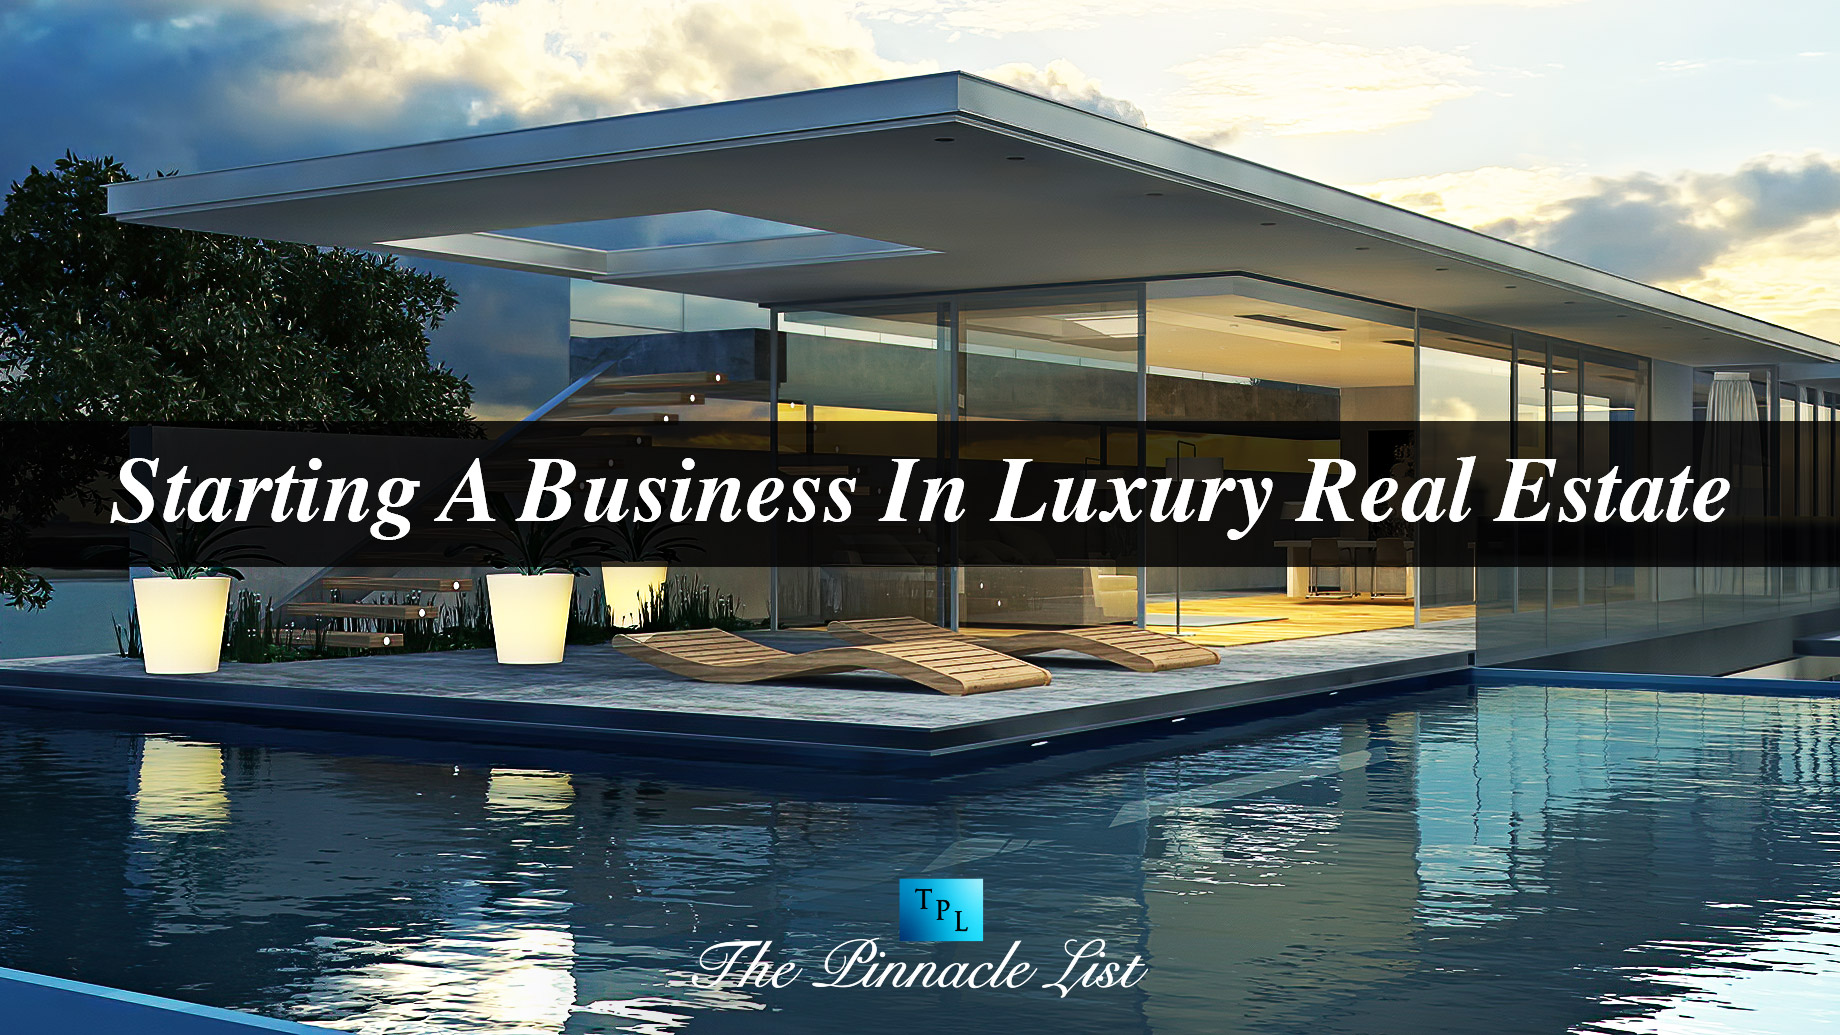 Starting A Business In Luxury Real Estate